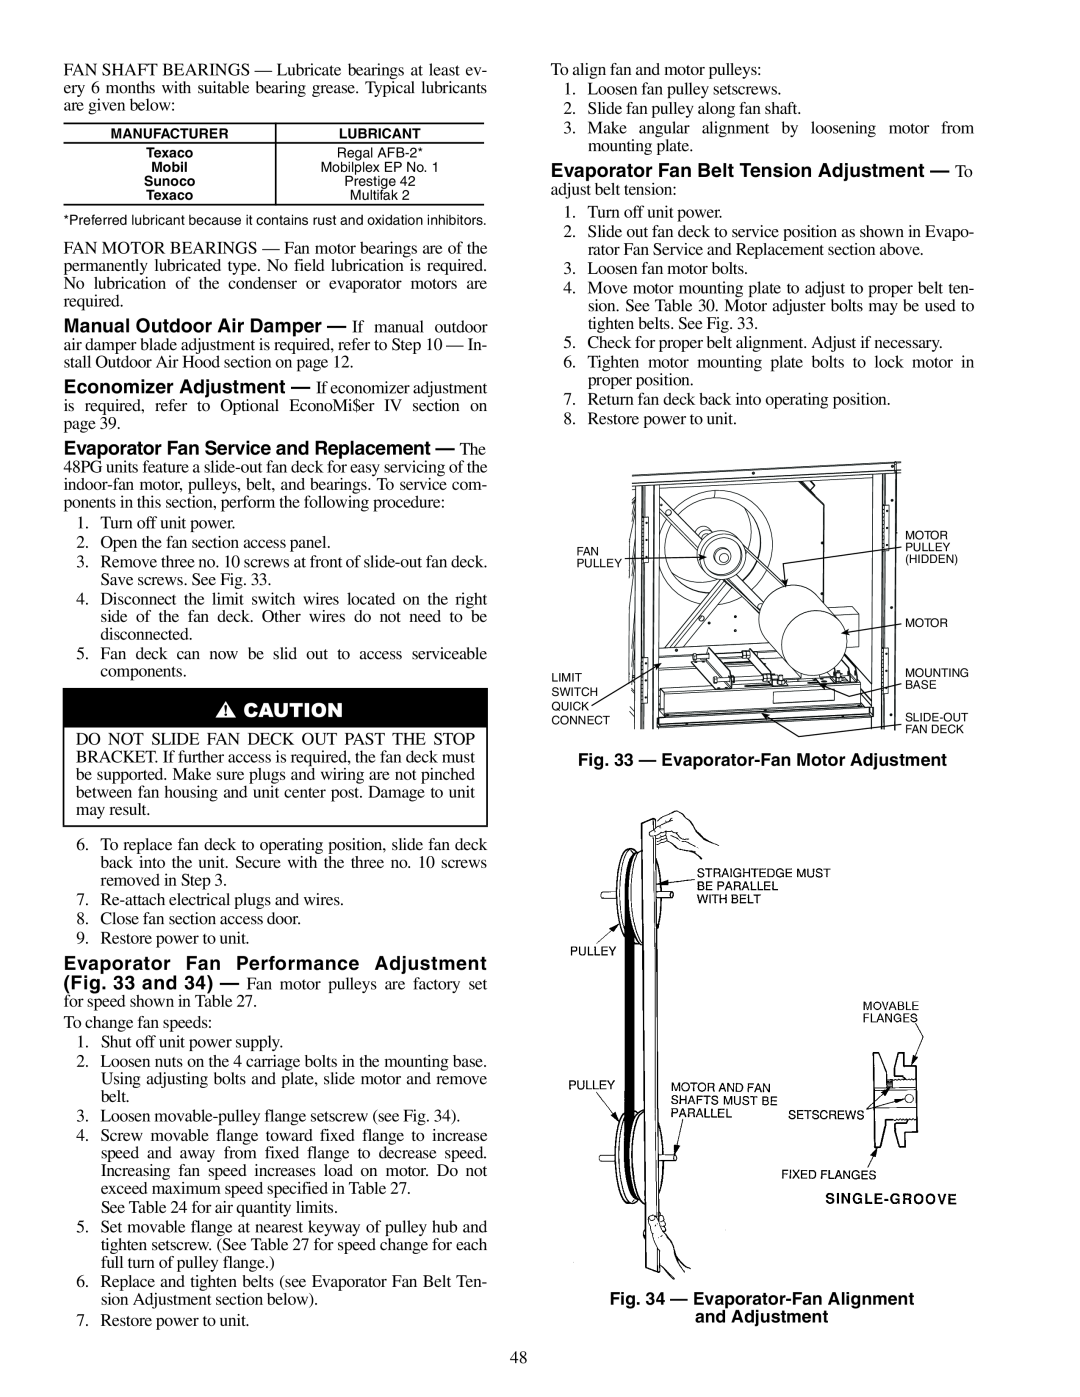 Carrier 48PG20-28 specifications Evaporator-FanMotor Adjustment, Evaporator-FanAlignment and Adjustment 